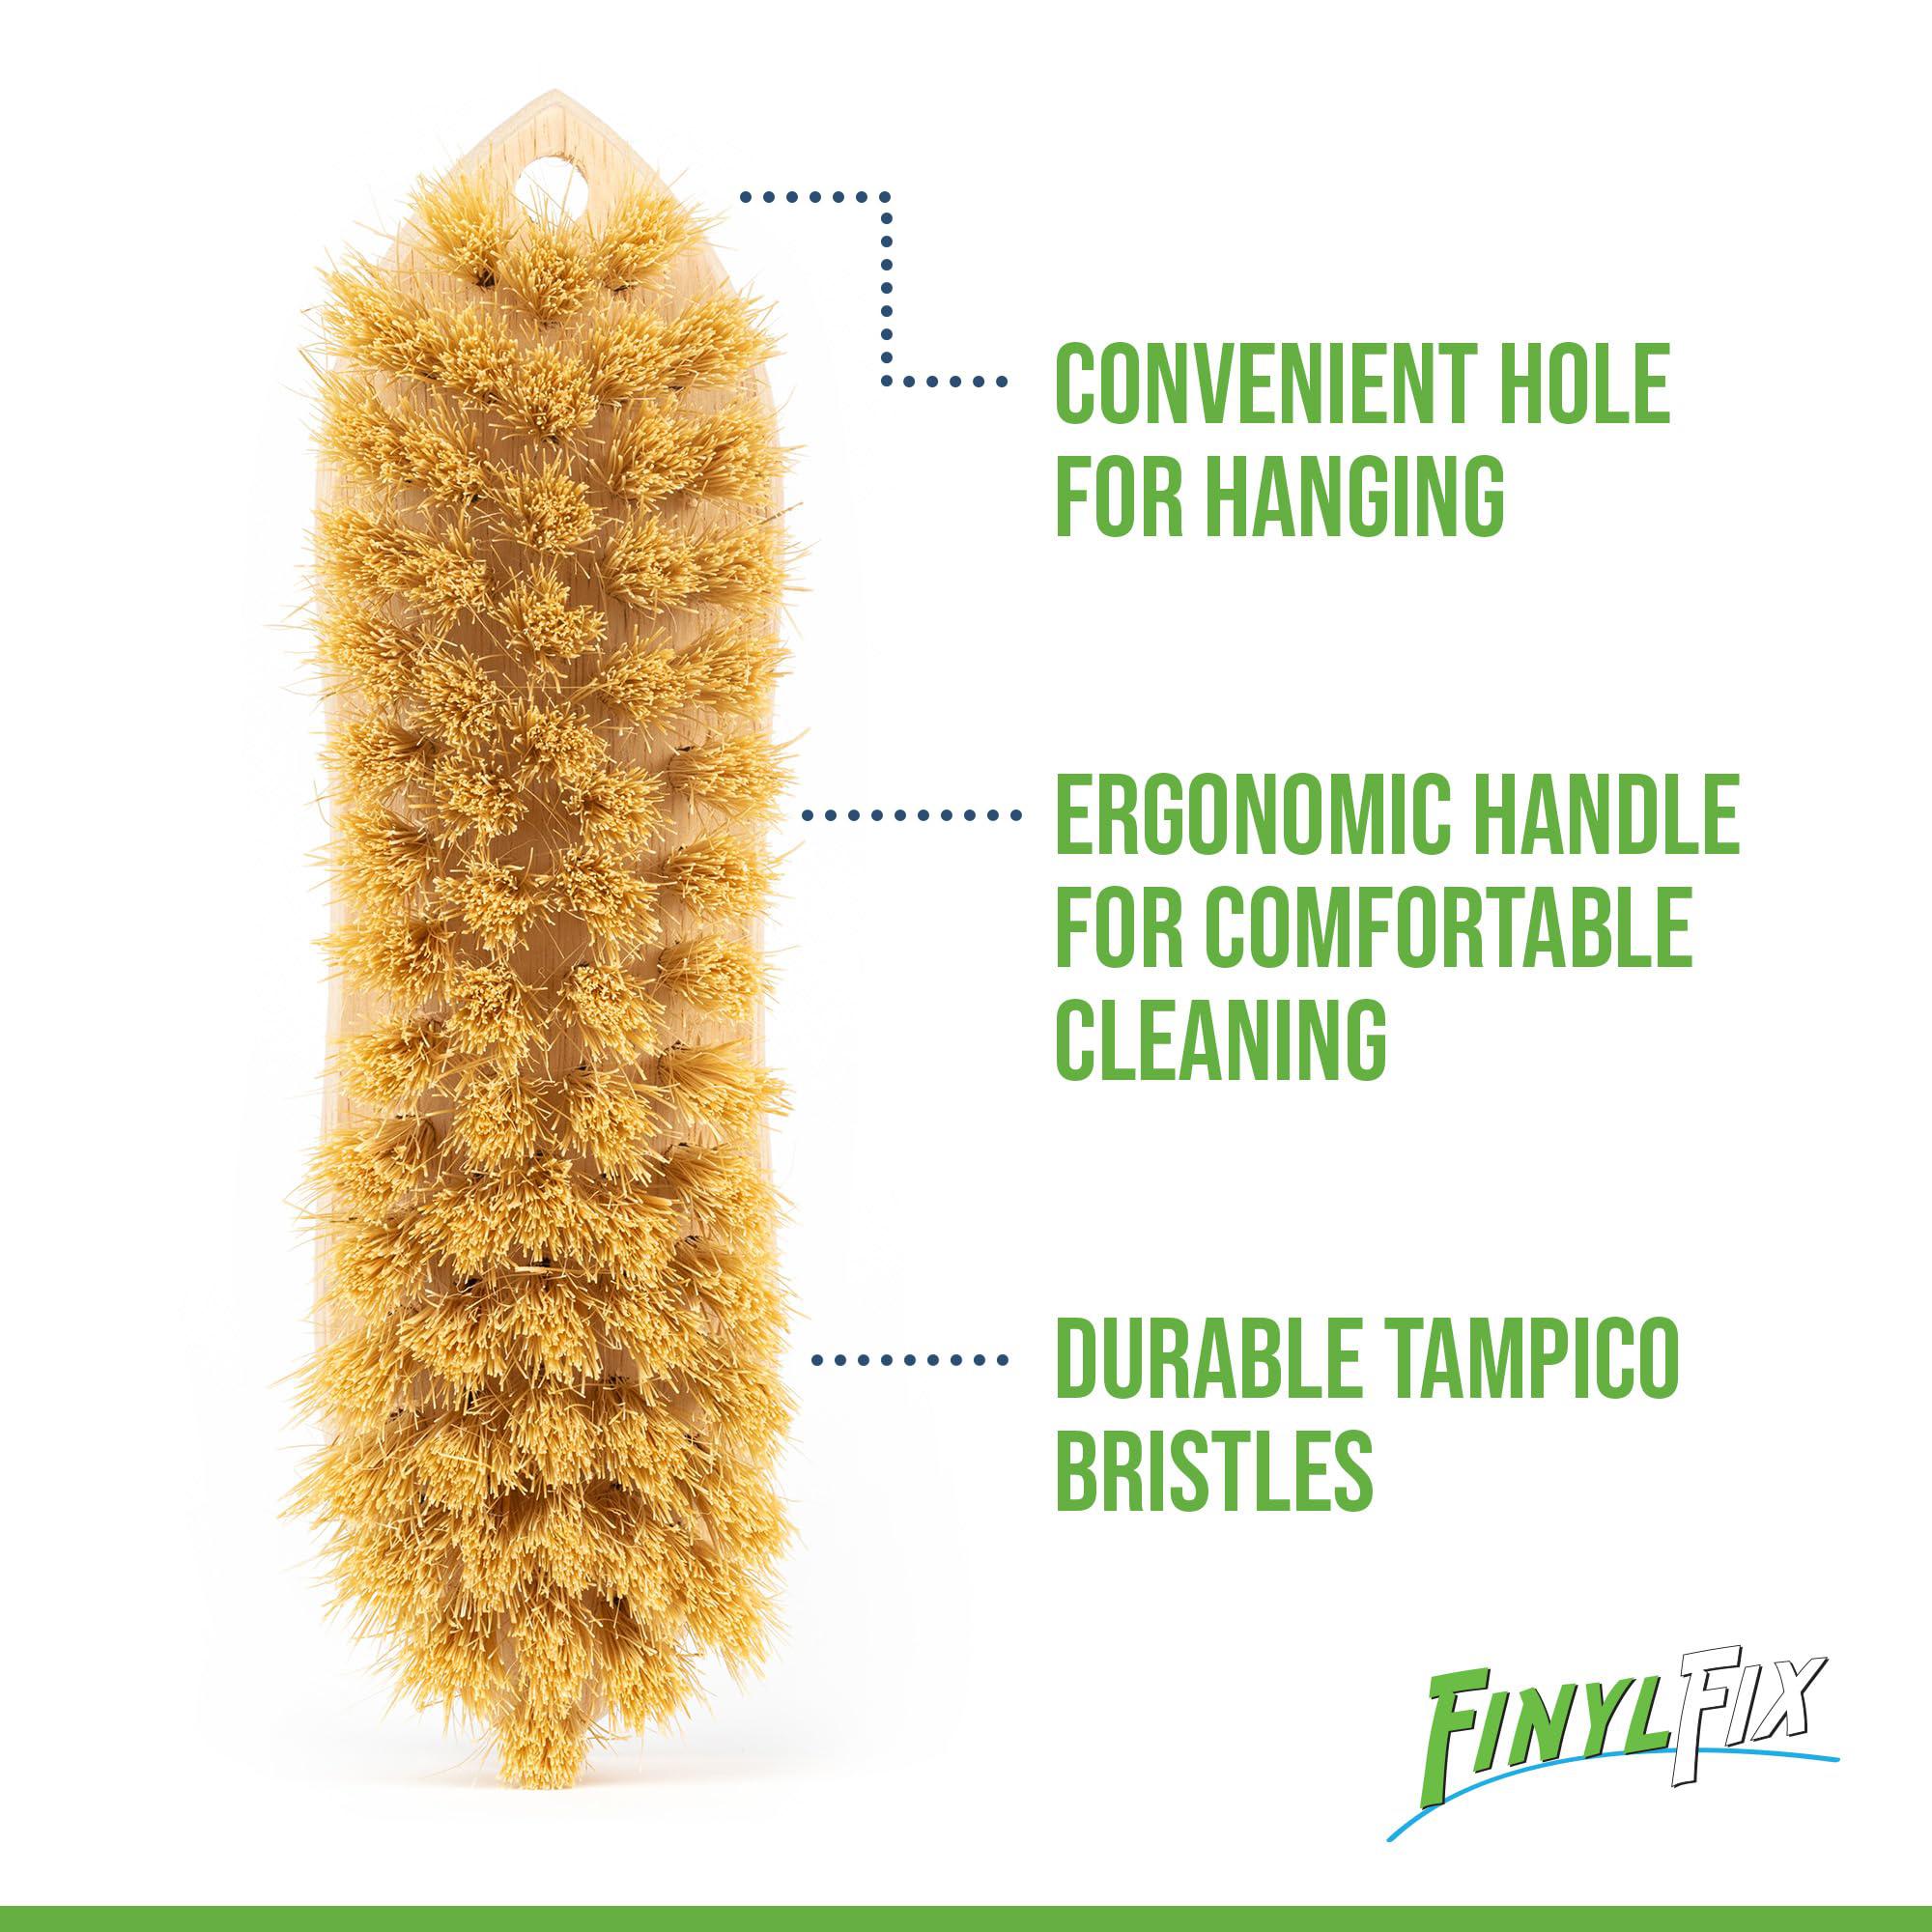 finyl fix vinyl & leather scrub brush - natural, non-abrasive tampico bristles: upholstery cleaning, boats, canvas, car detai